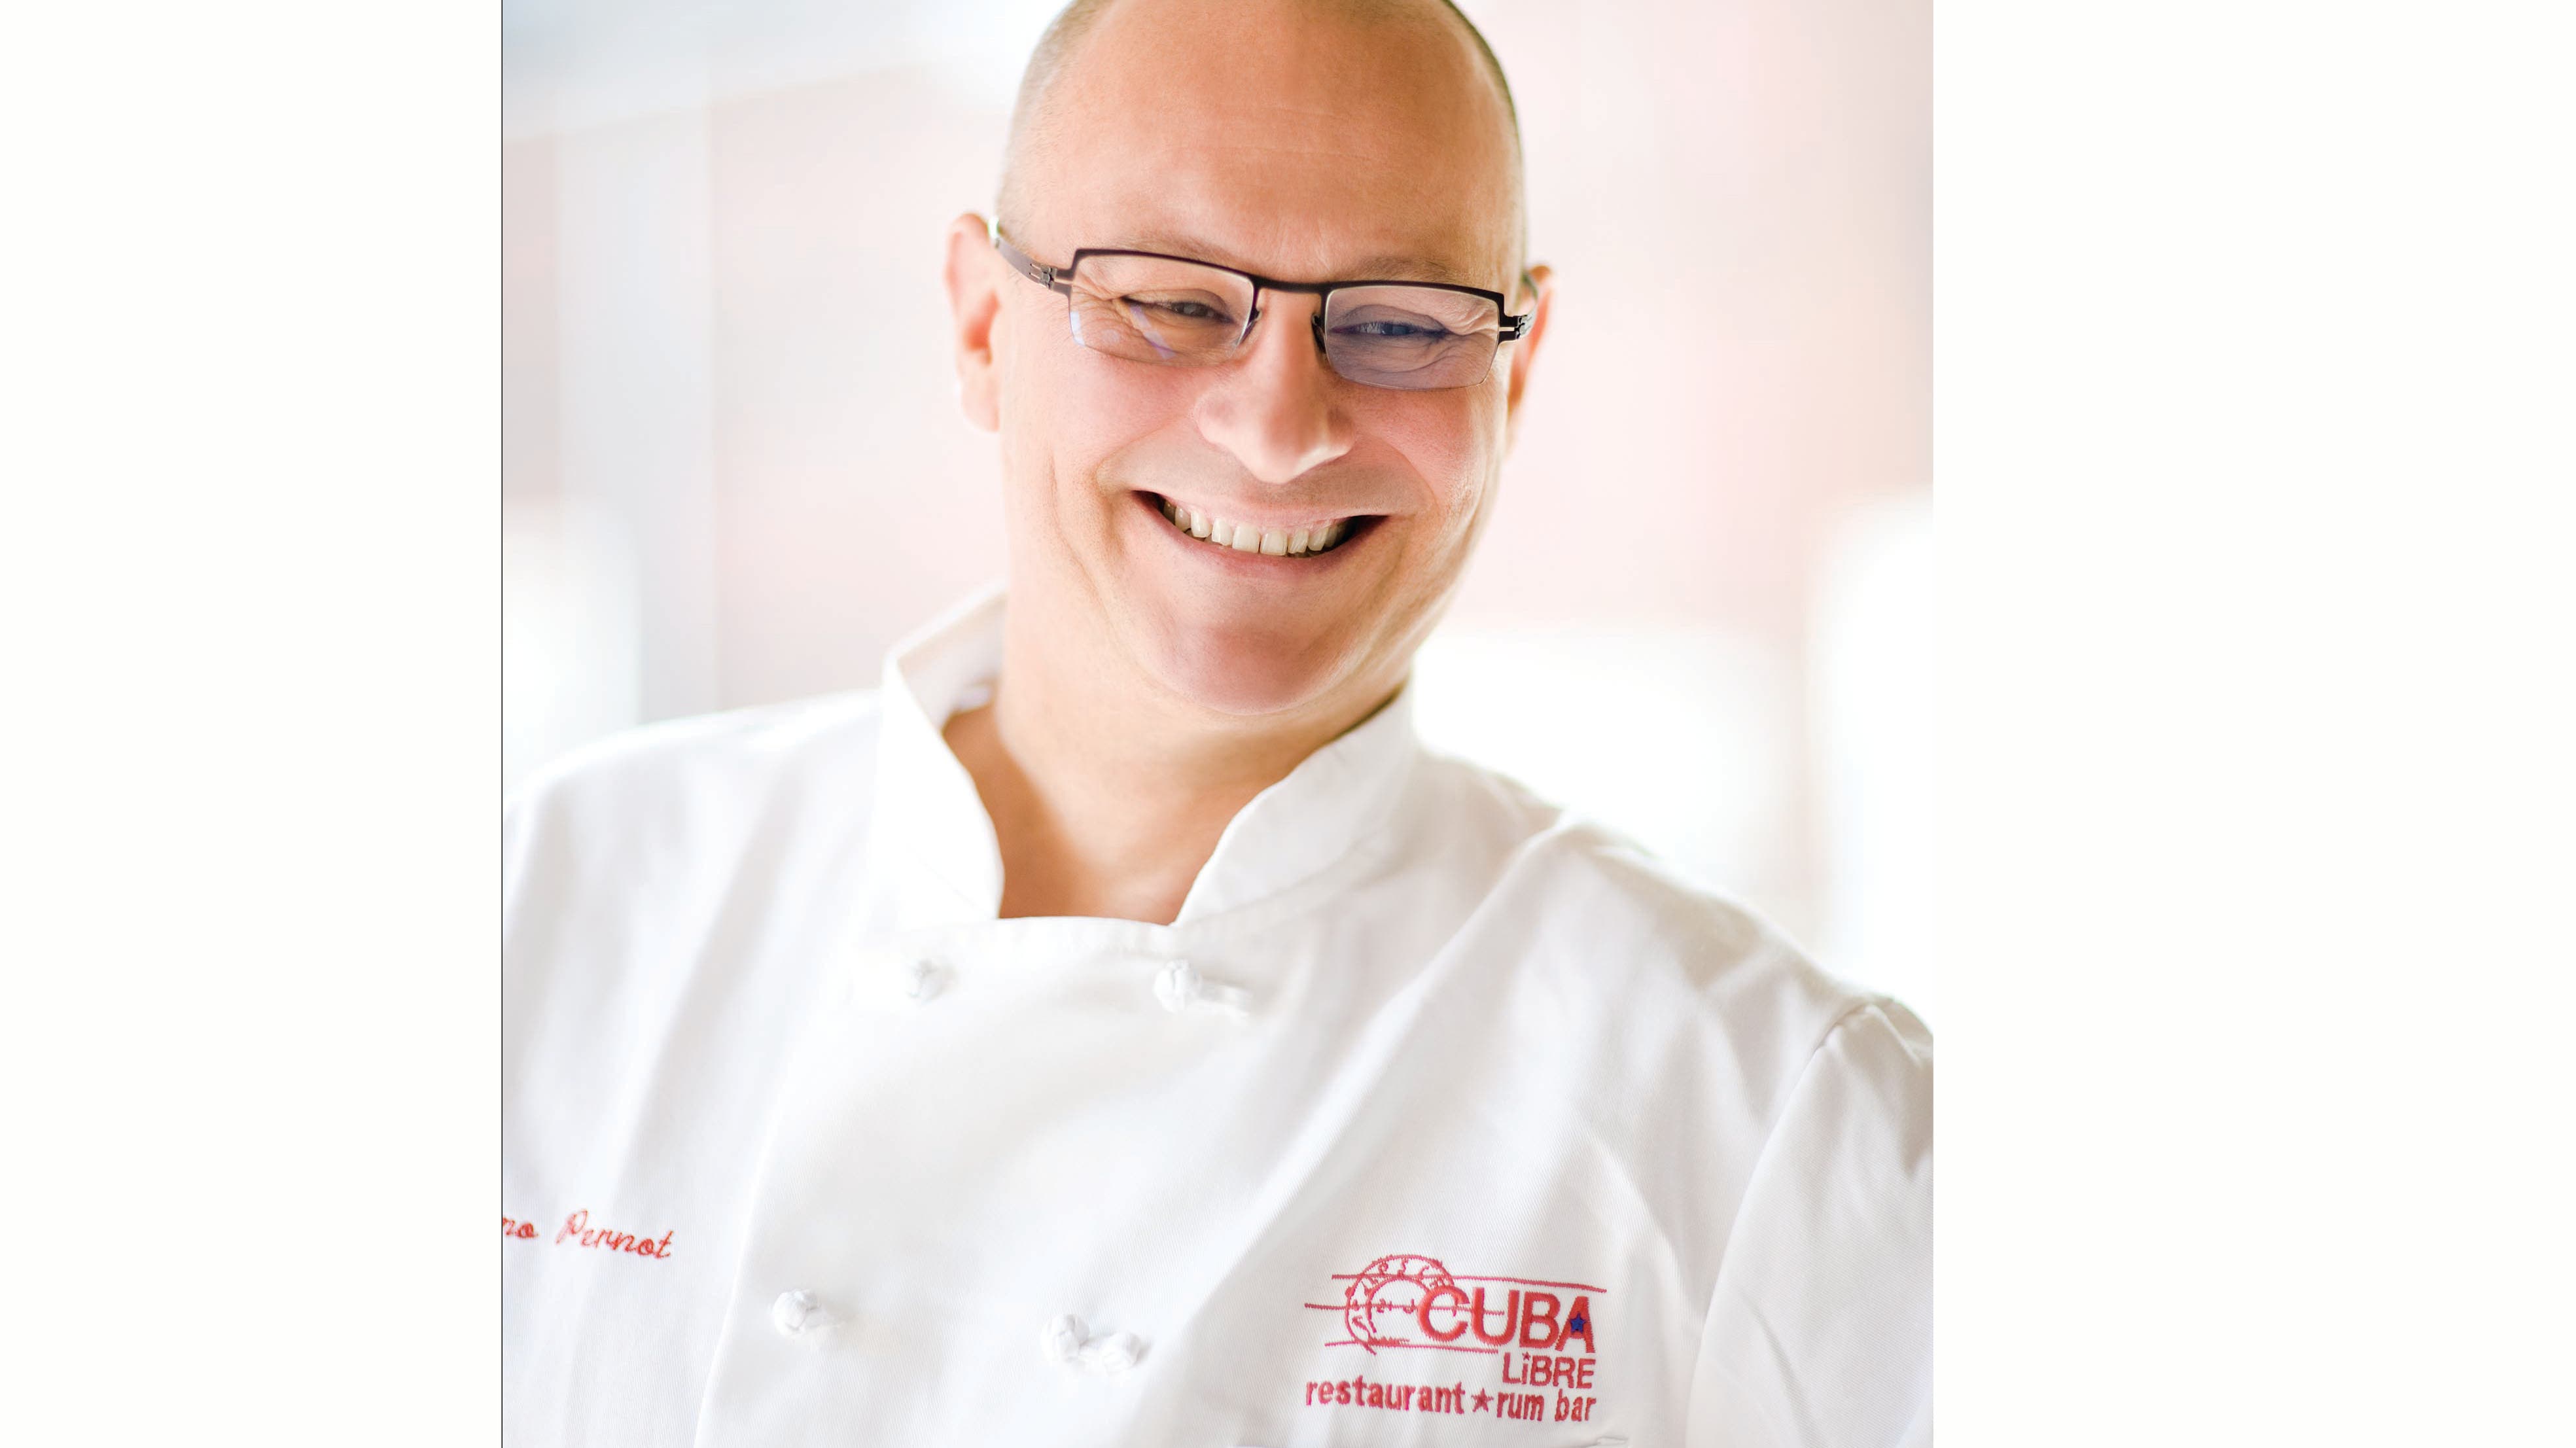 Sizzling Latino Chef: Guillermo Pernot